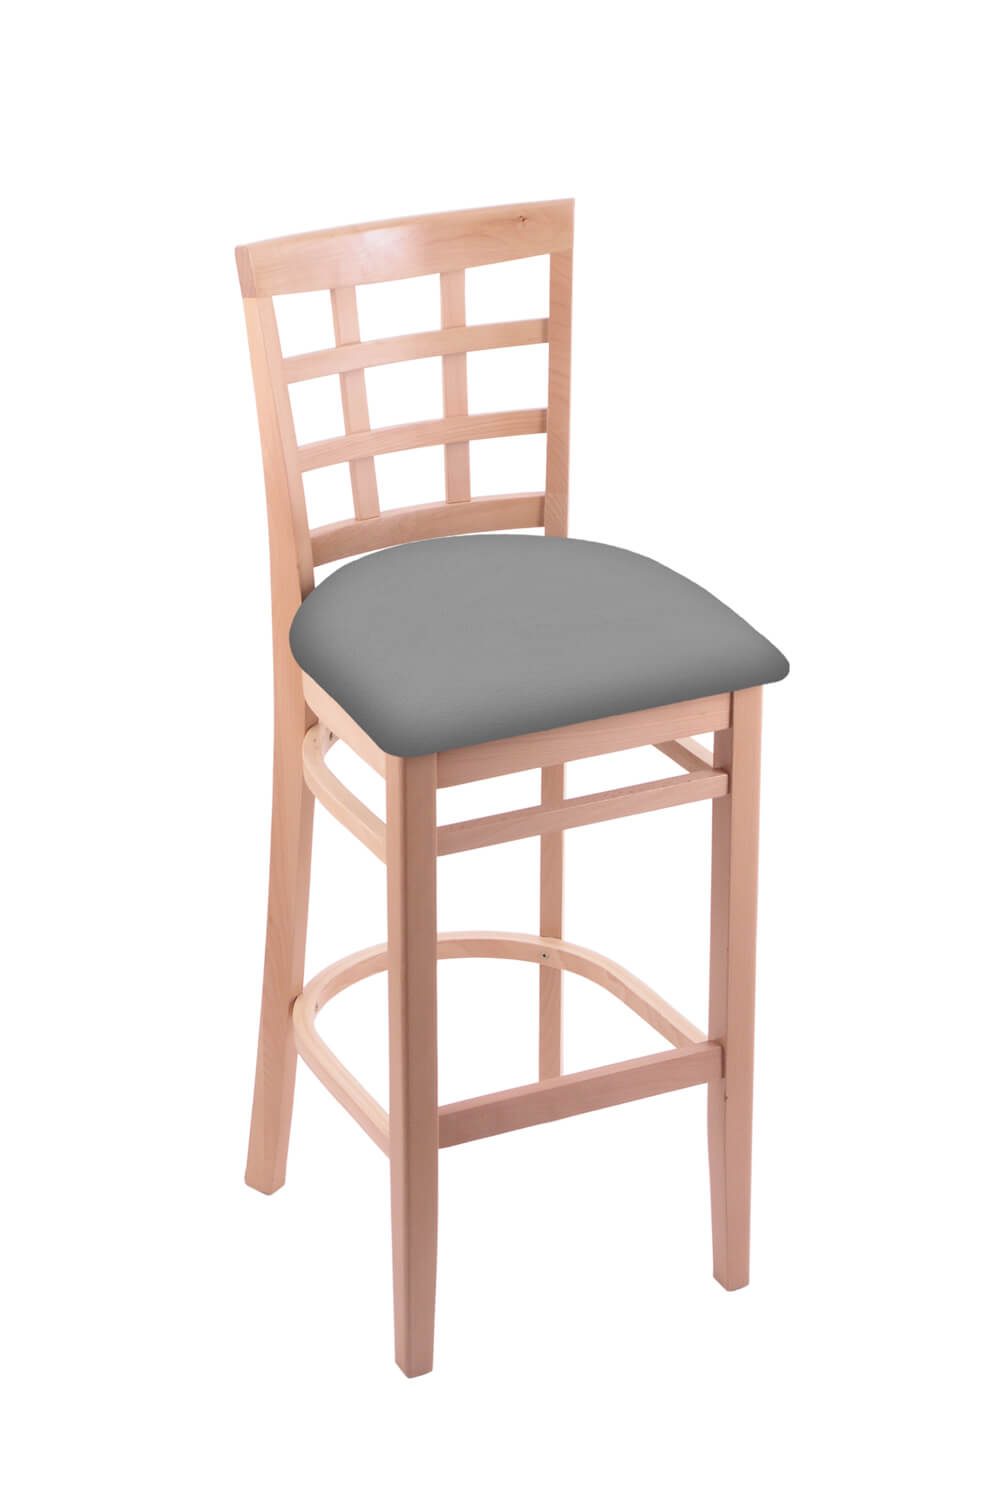 https://barstoolcomforts.com/wp-content/uploads/2017/10/holland-hampton-3130-barstool-with-back-in-natural-wood-and-canter-folkstone-grey-seat-cushion.jpg